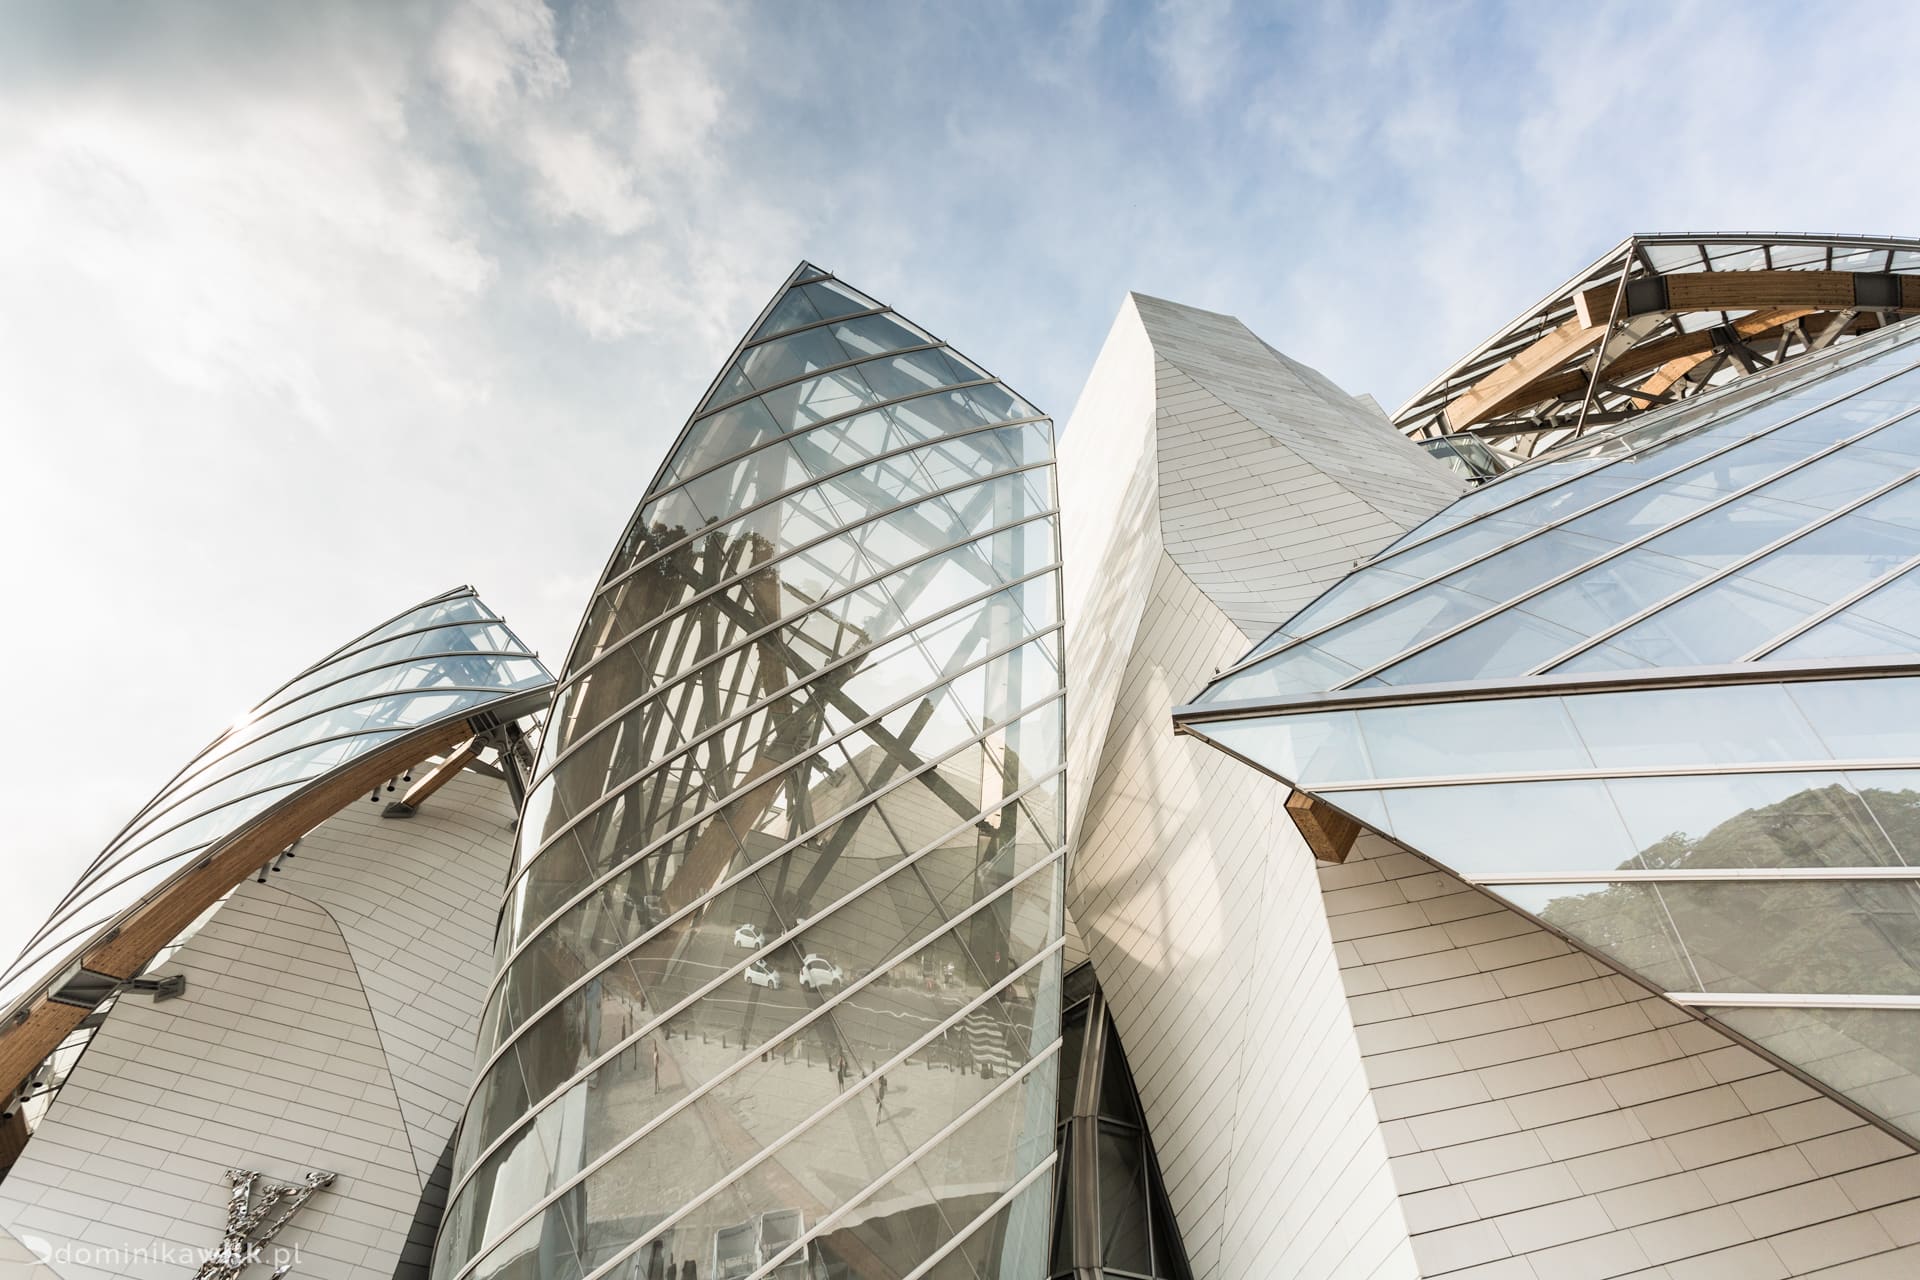 Fondation Louis Vuitton by Gehry Partners